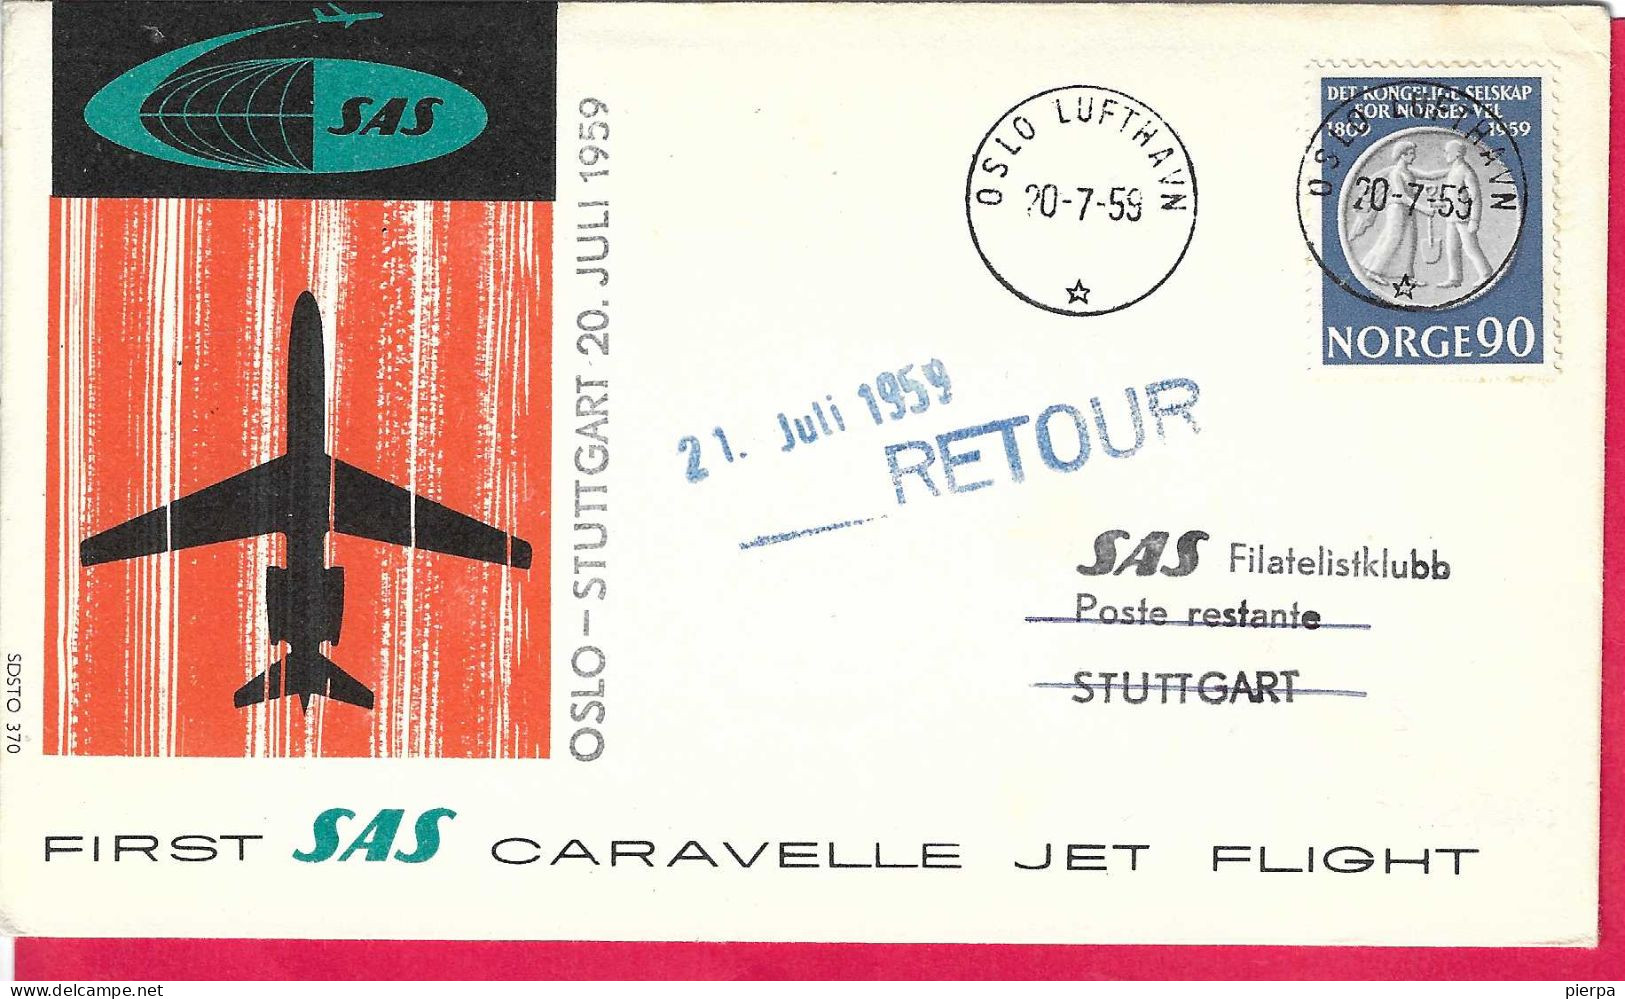 NORGE - FIRST SAS CARAVELLE FLIGHT - FROM OSLO TO STUTTGART *20.7.59* ON OFFICIAL COVER - Covers & Documents